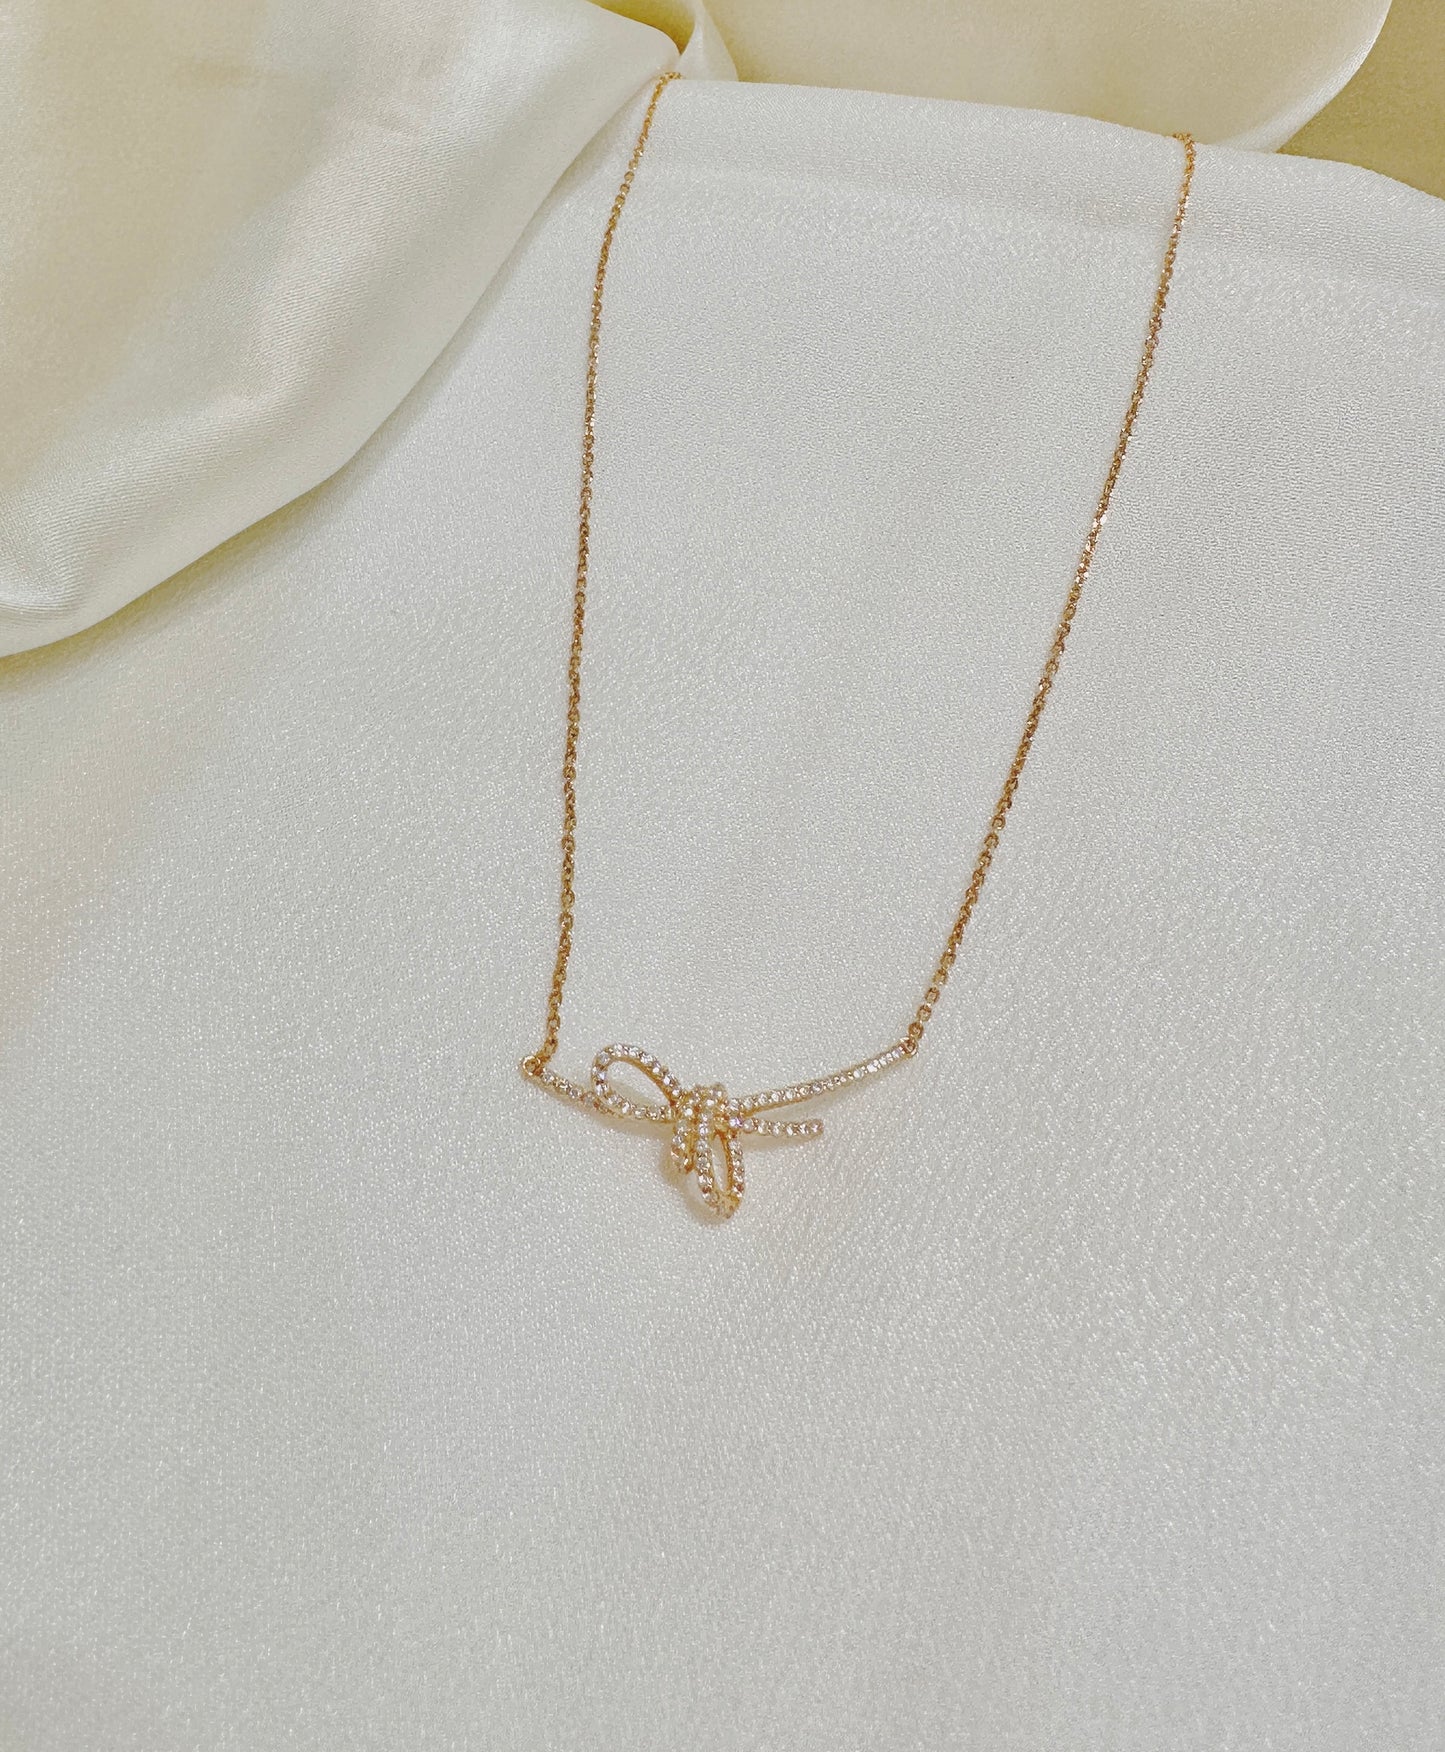 [S925 Silver] The Gift - Rose Gold Necklace